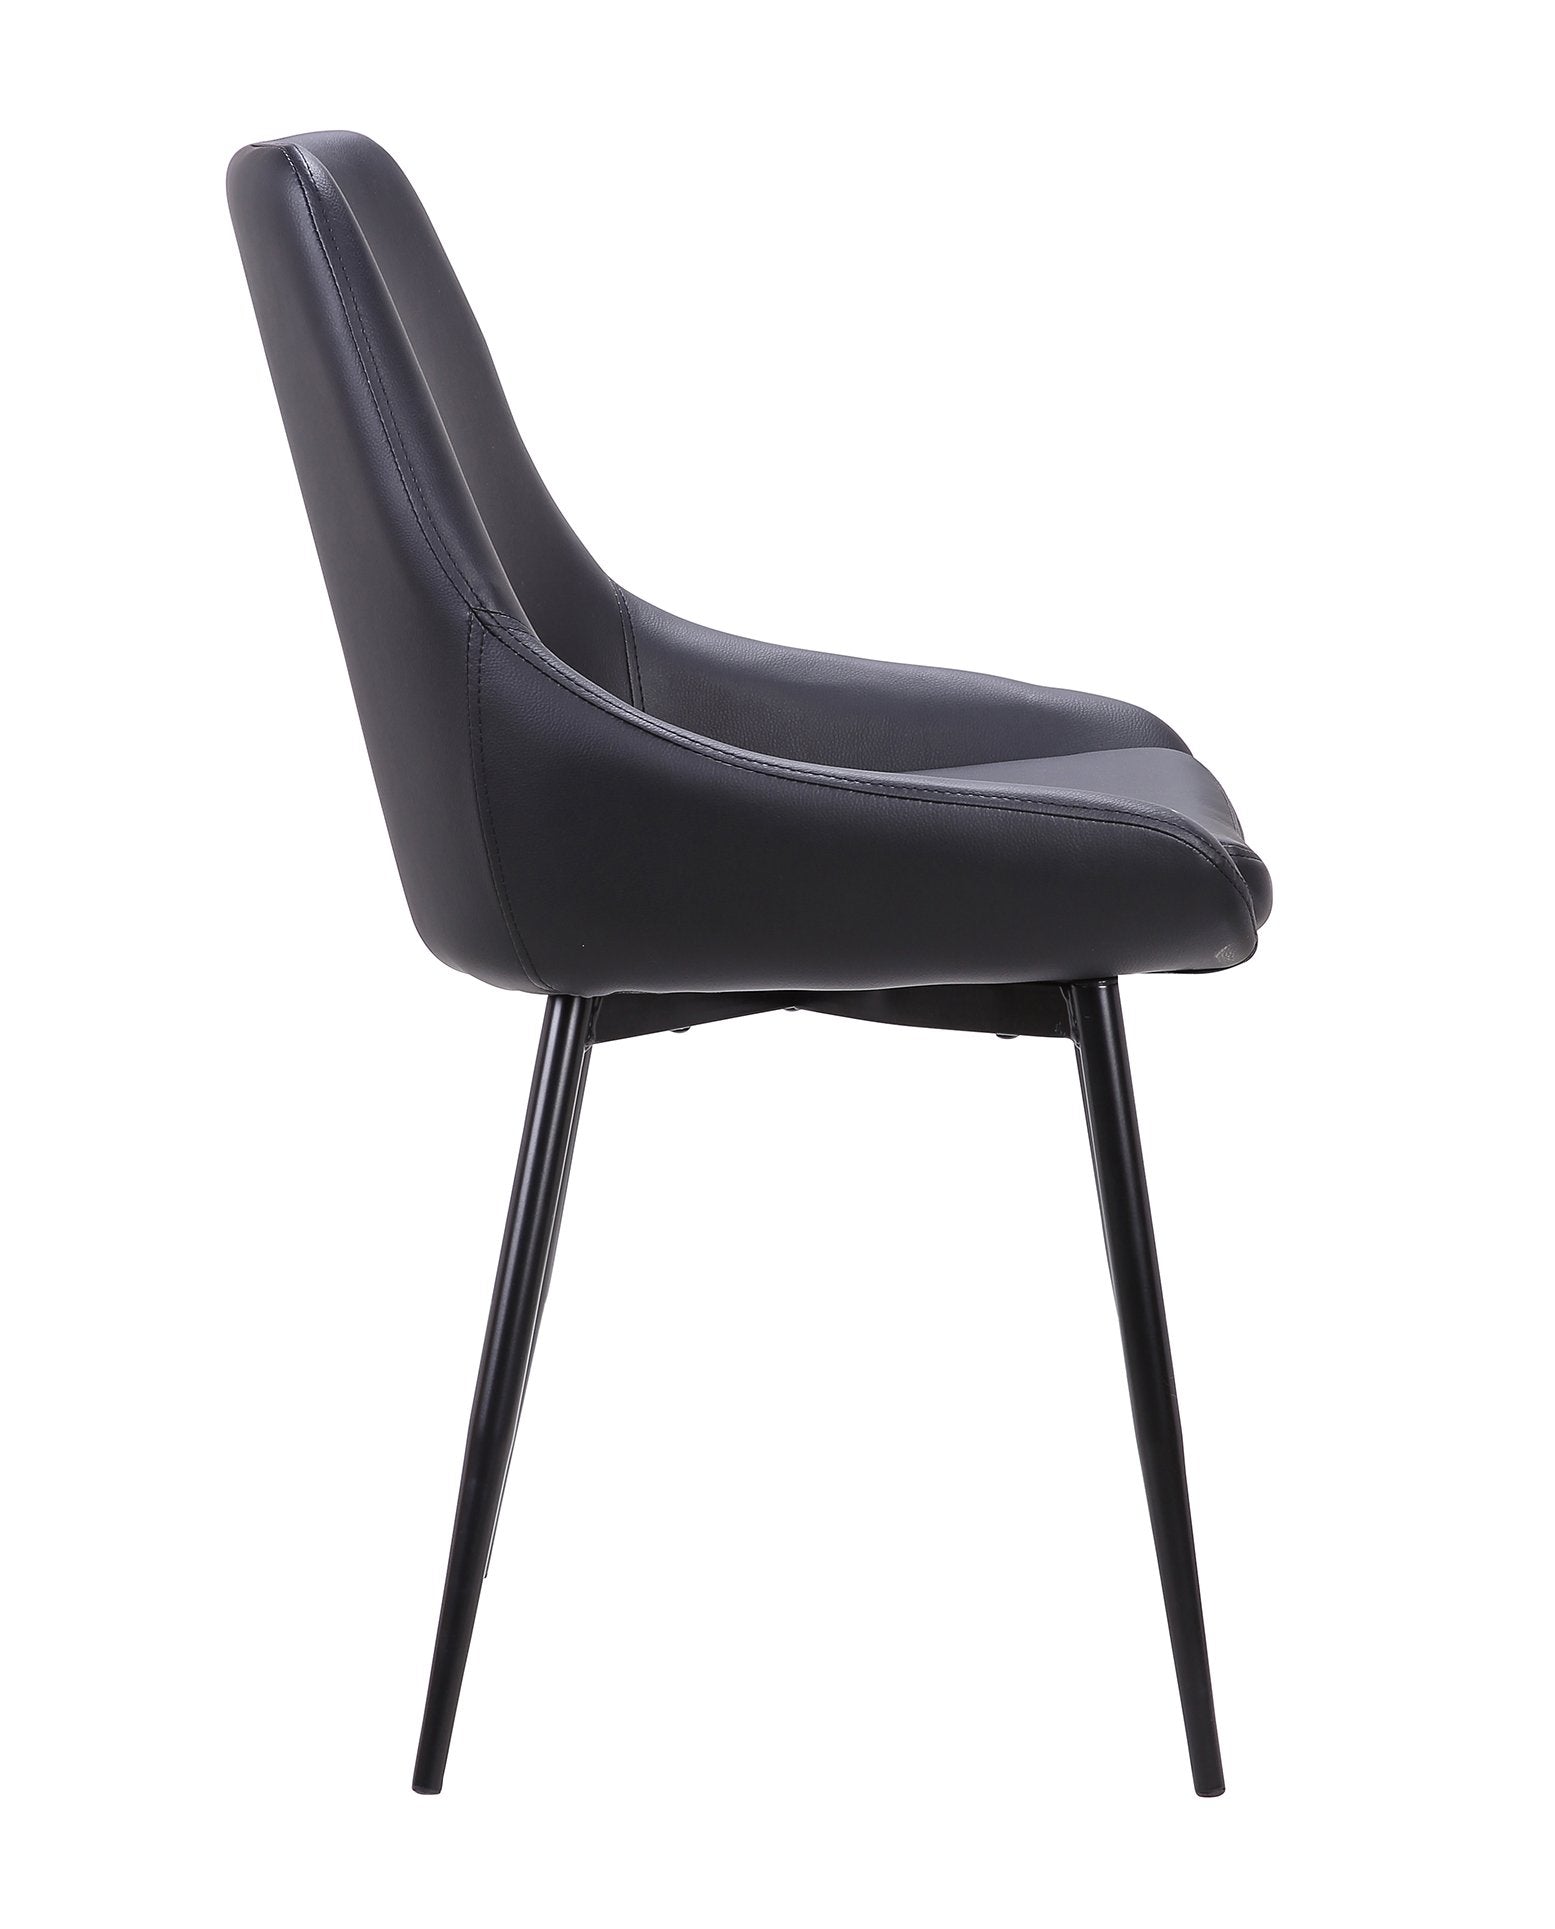 black dining chairs